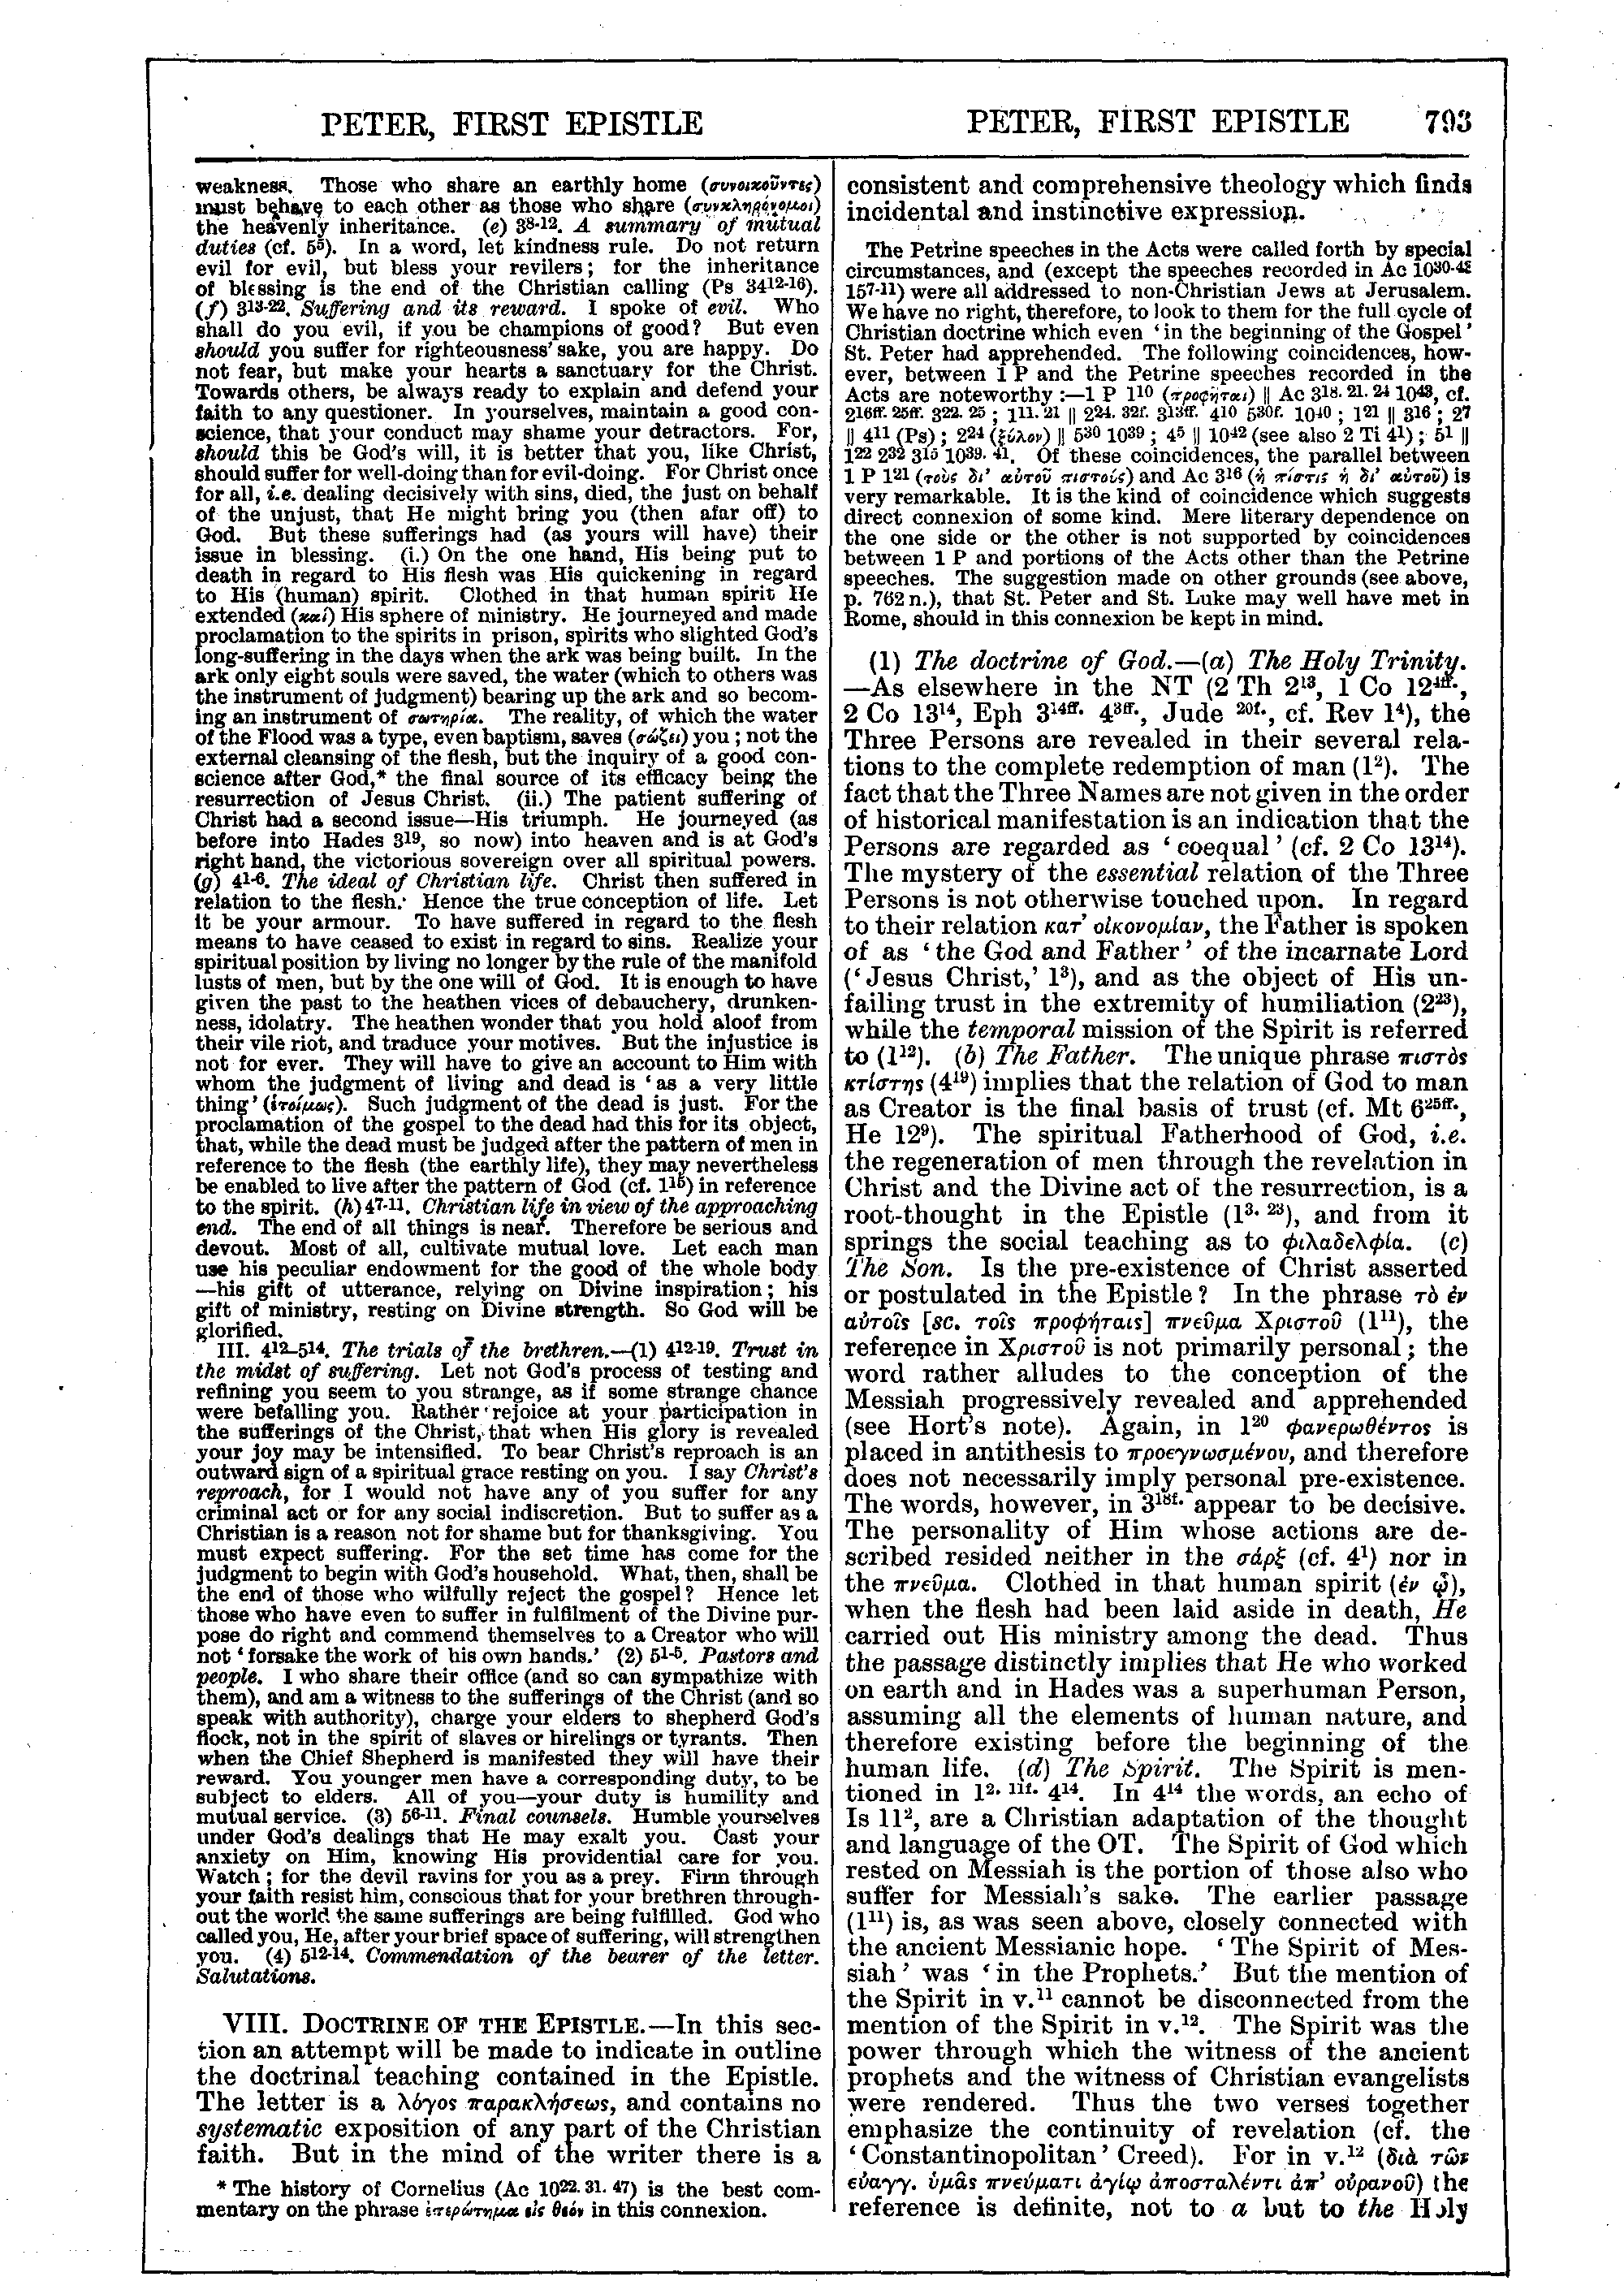 Image of page 793